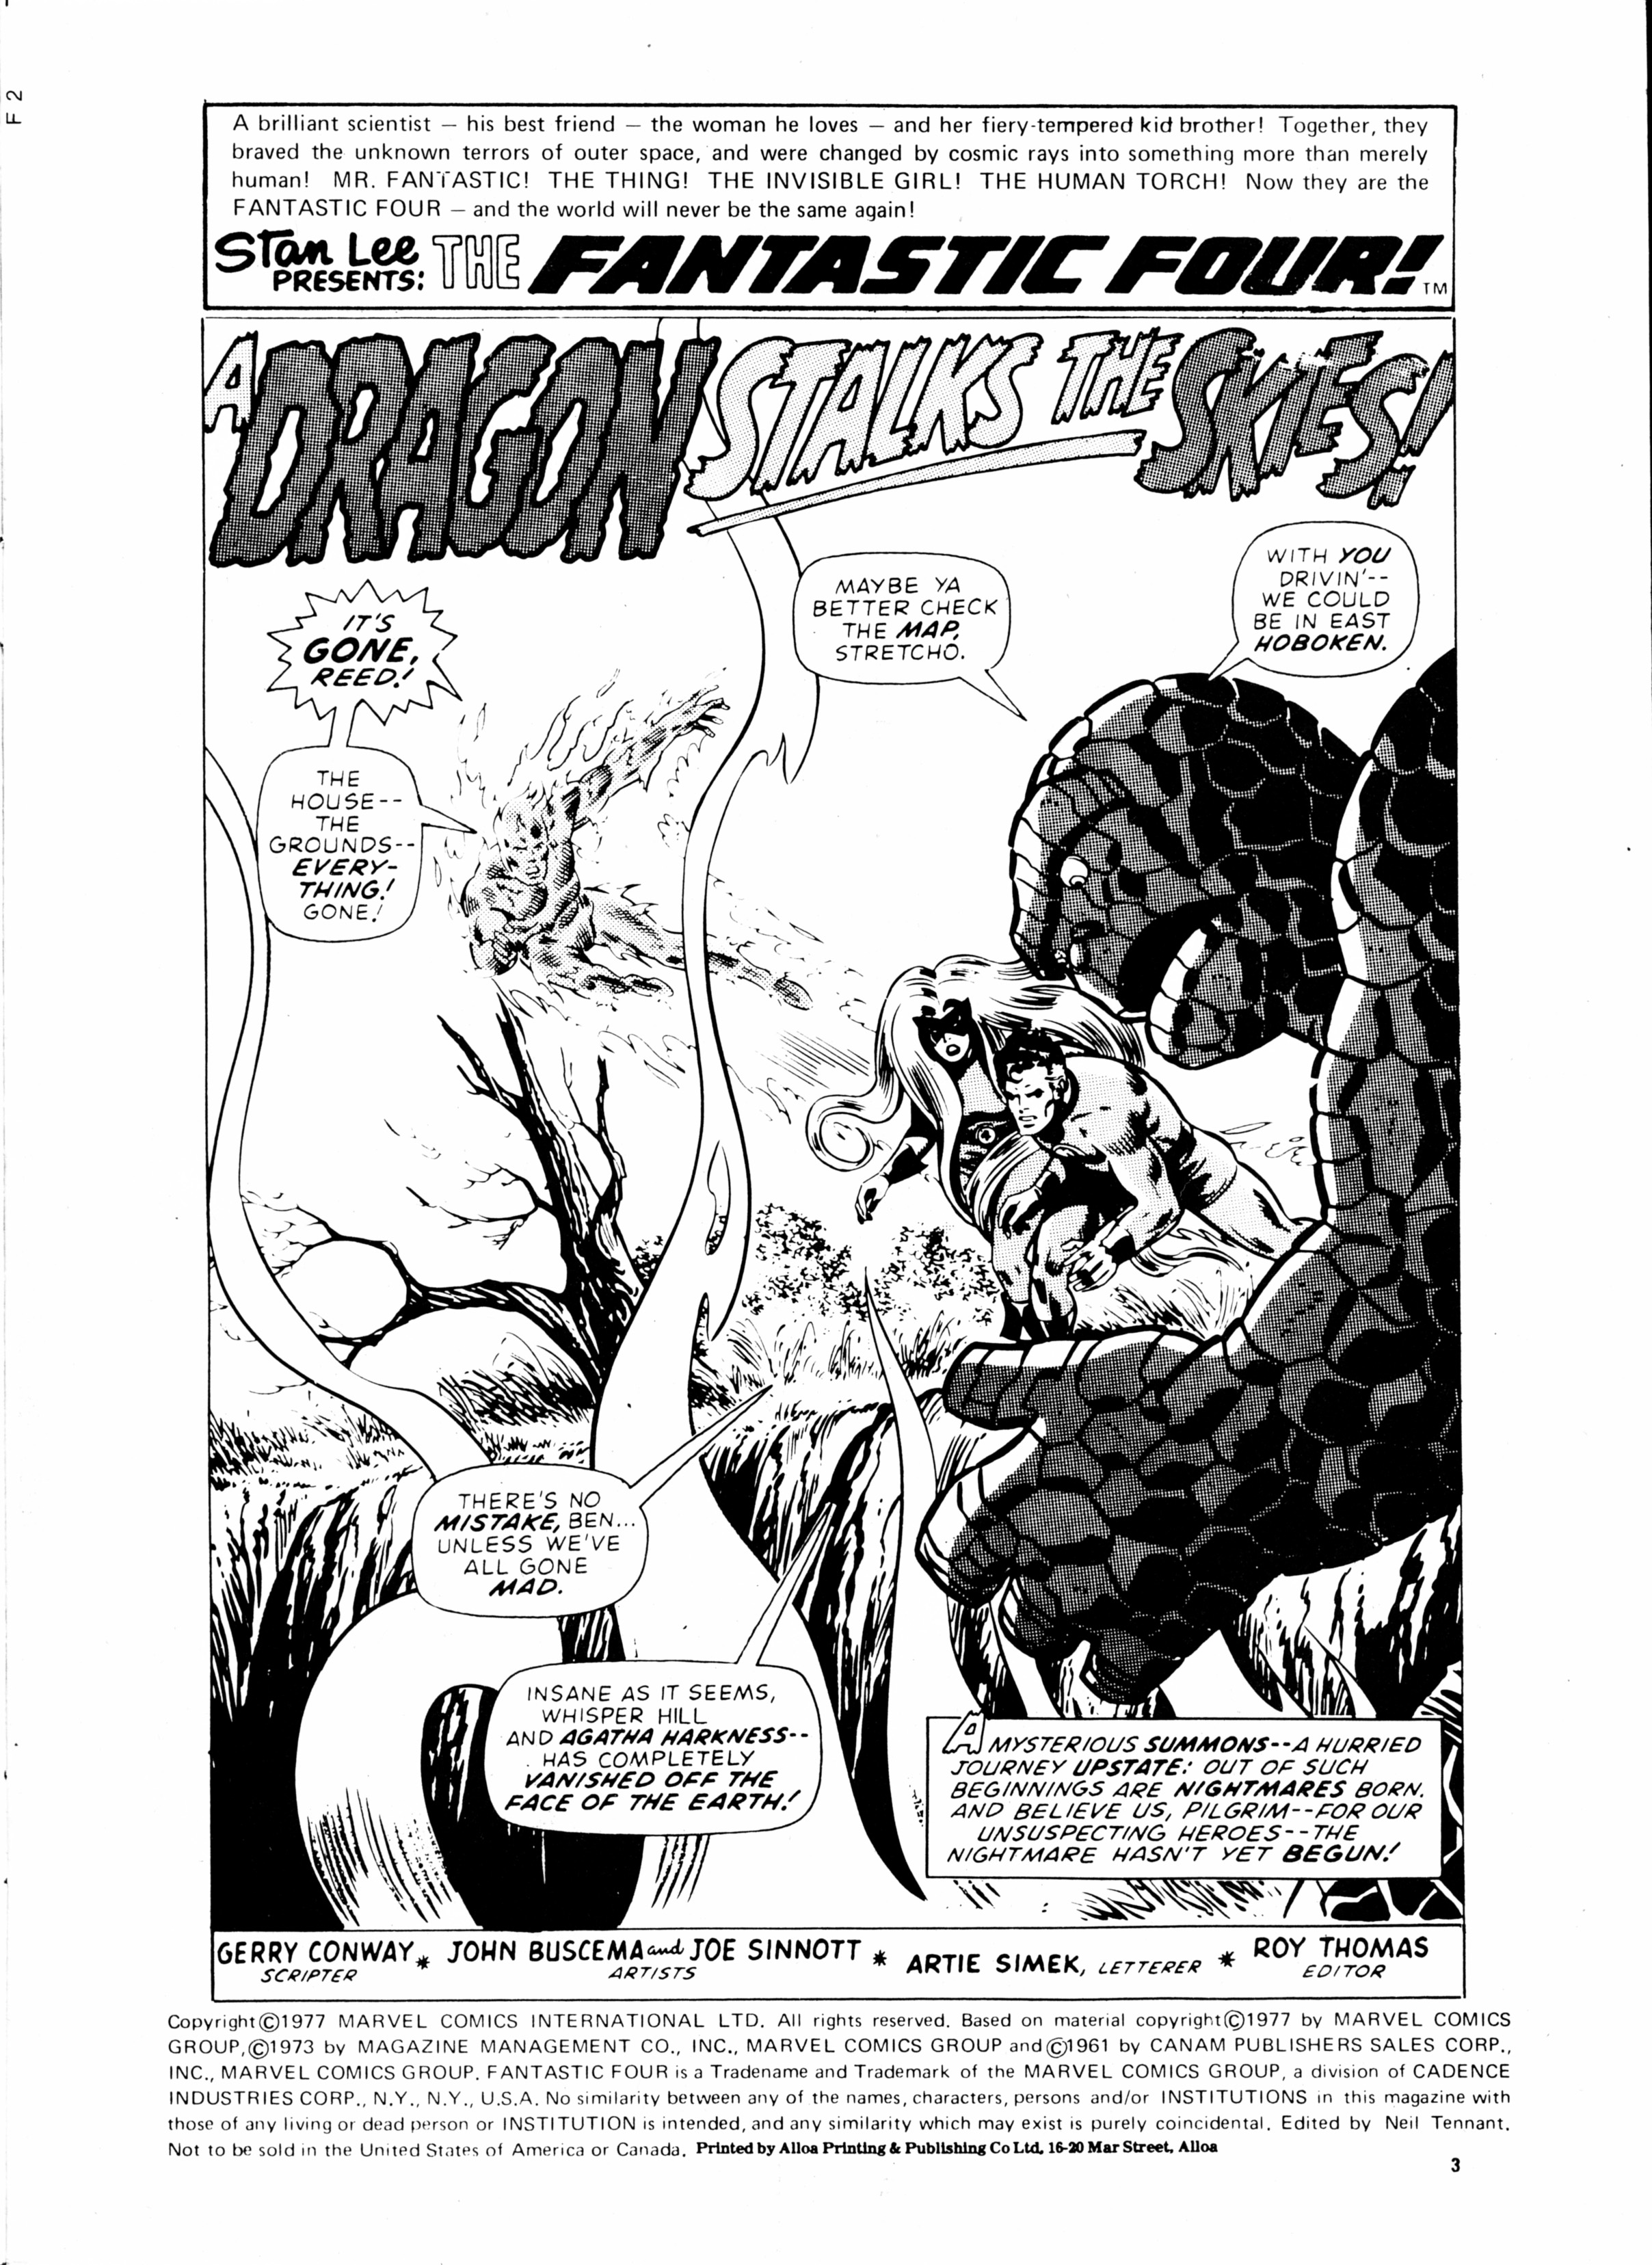 Read online Fantastic Four (1982) comic -  Issue #2 - 3